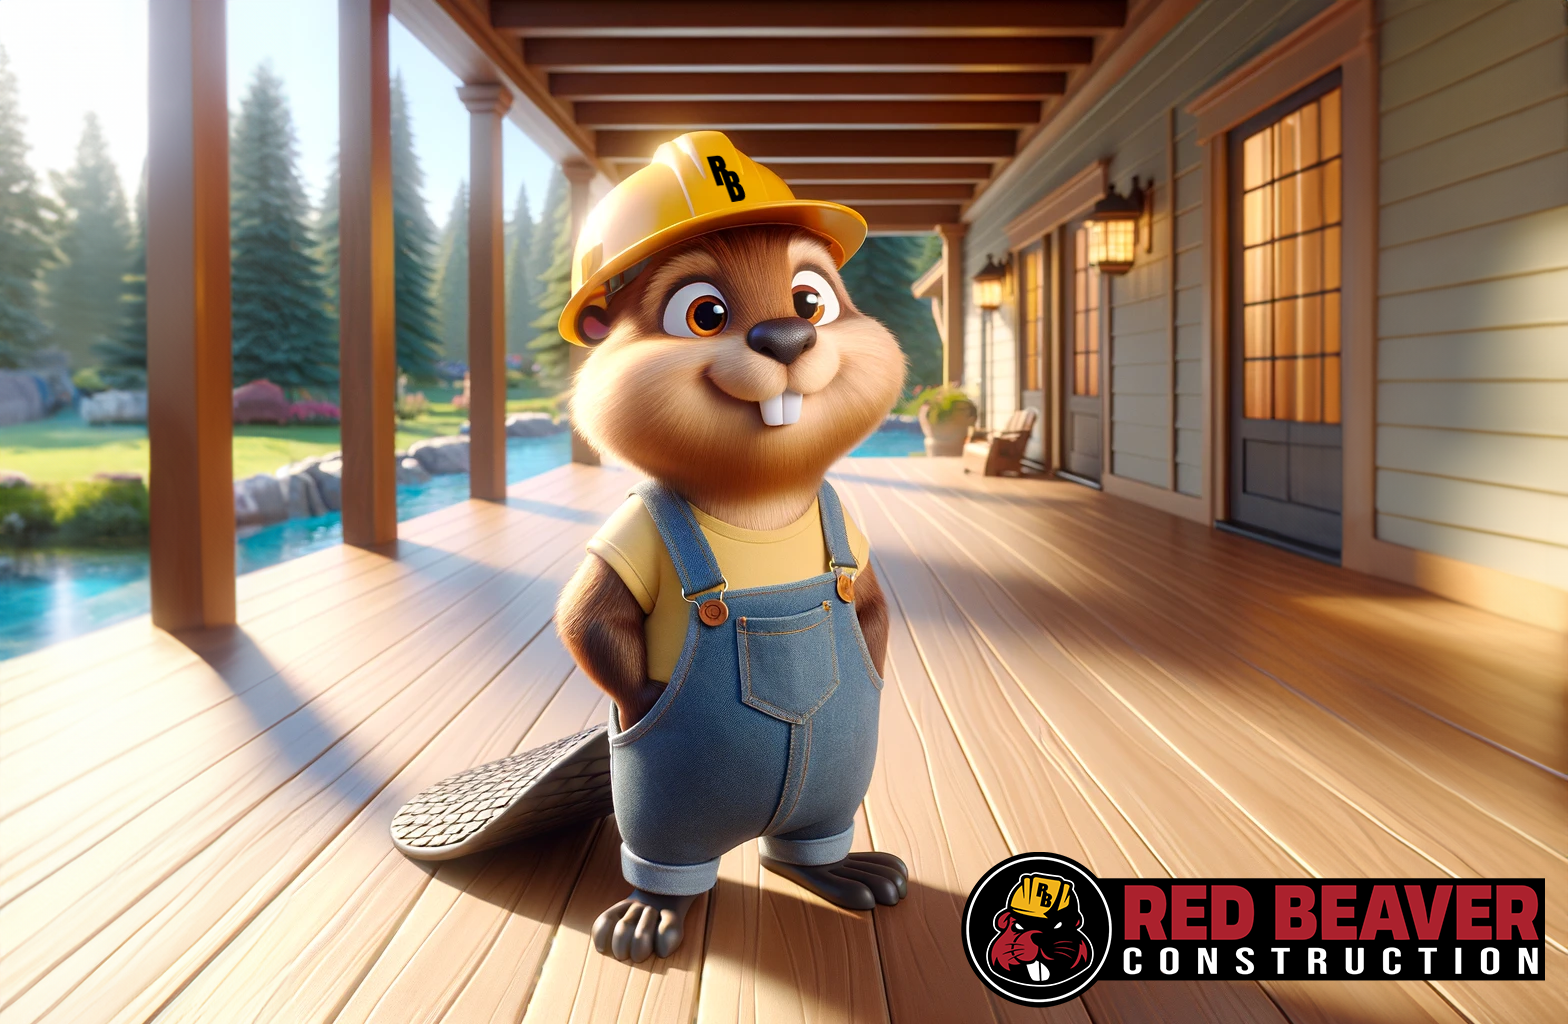 Red Beaver Construction mascot standing proudly on a newly constructed deck.